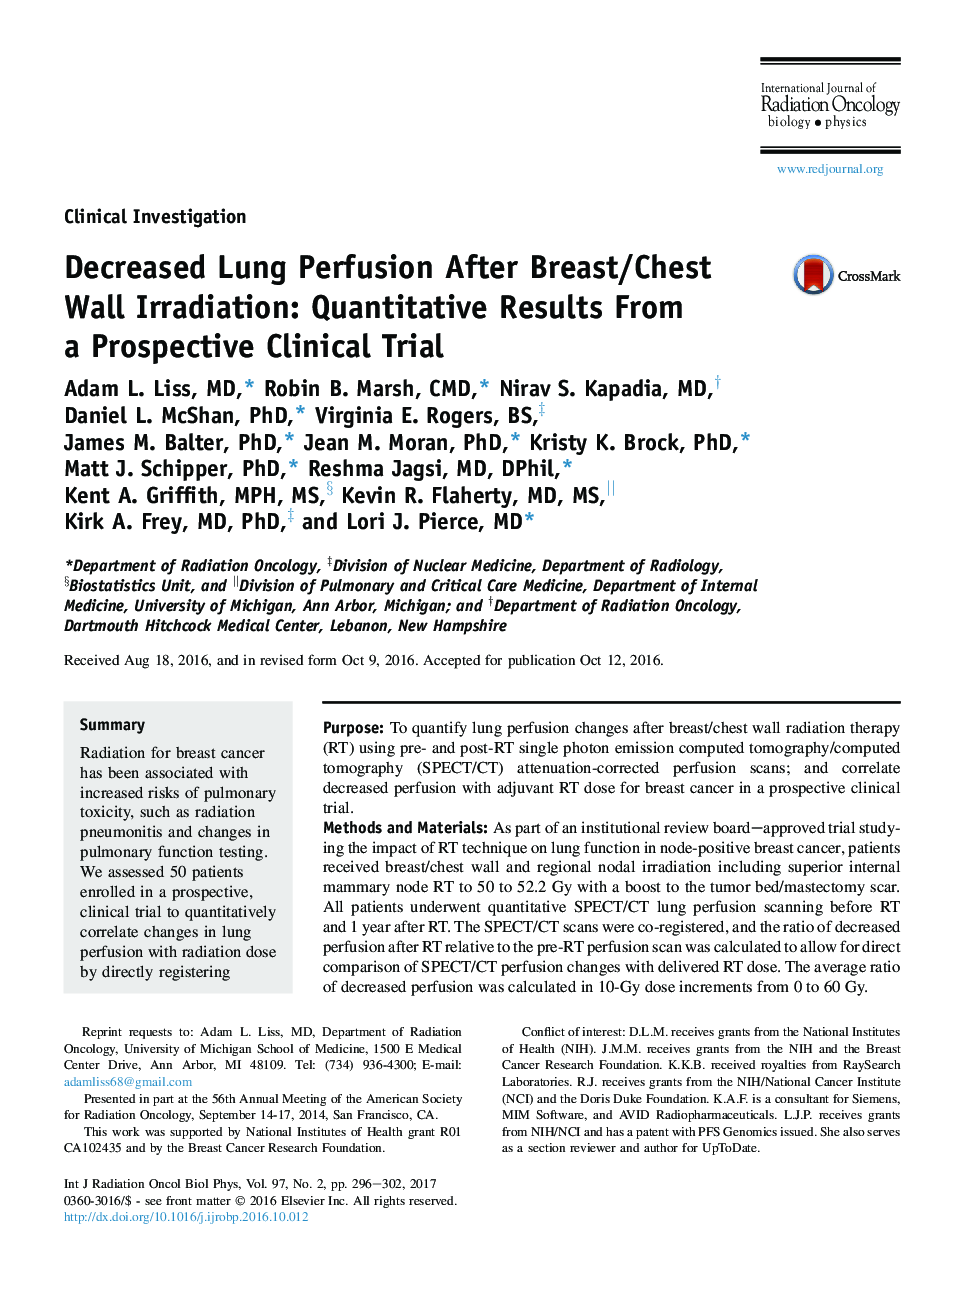 Decreased Lung Perfusion After Breast/Chest Wall Irradiation: Quantitative Results From a Prospective Clinical Trial